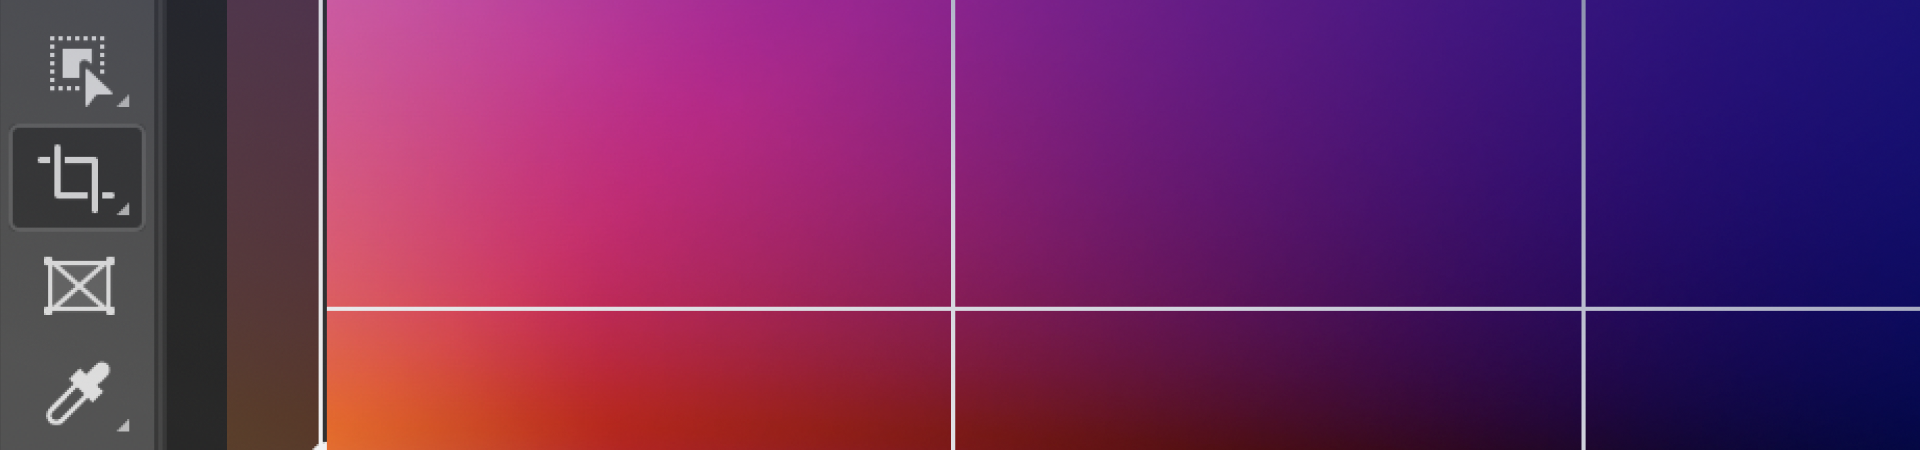 Gradient on a canvas with a design toolbar on the left